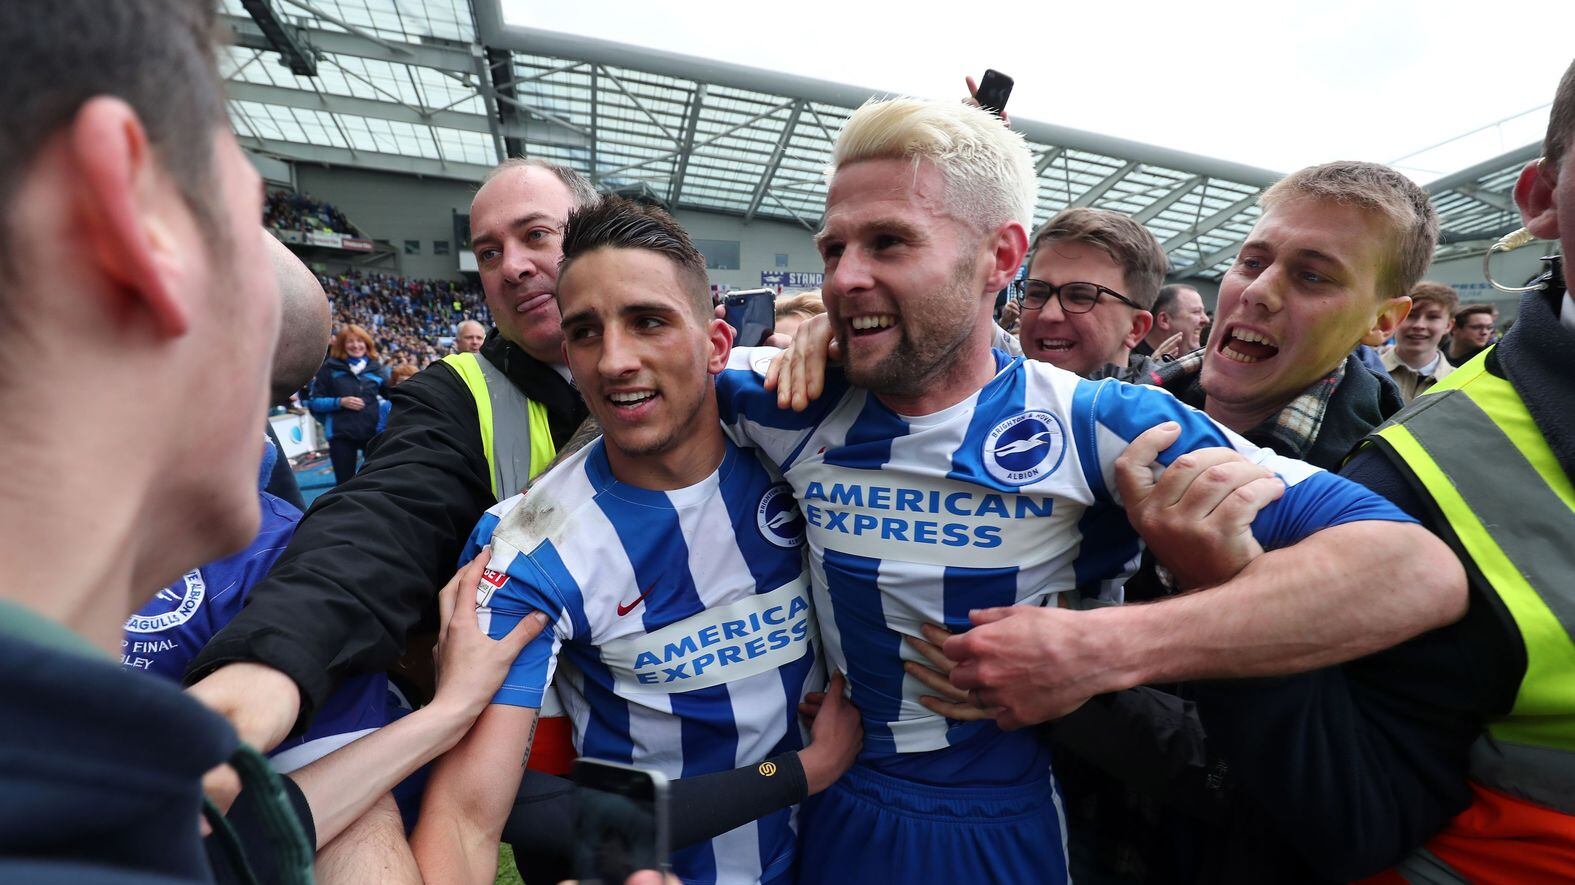 Brighton and Hove Albion's Anthony Knockaert (left) and their Northern Ireland international Oliver Norwood are mobbed by fans after helping Brighton end their 34-year exile from English soccer's top flight following their 2-1 Sky Bet Championship win over Wigan at the AMEX Stadium, Brighton on Monday April 17 2017